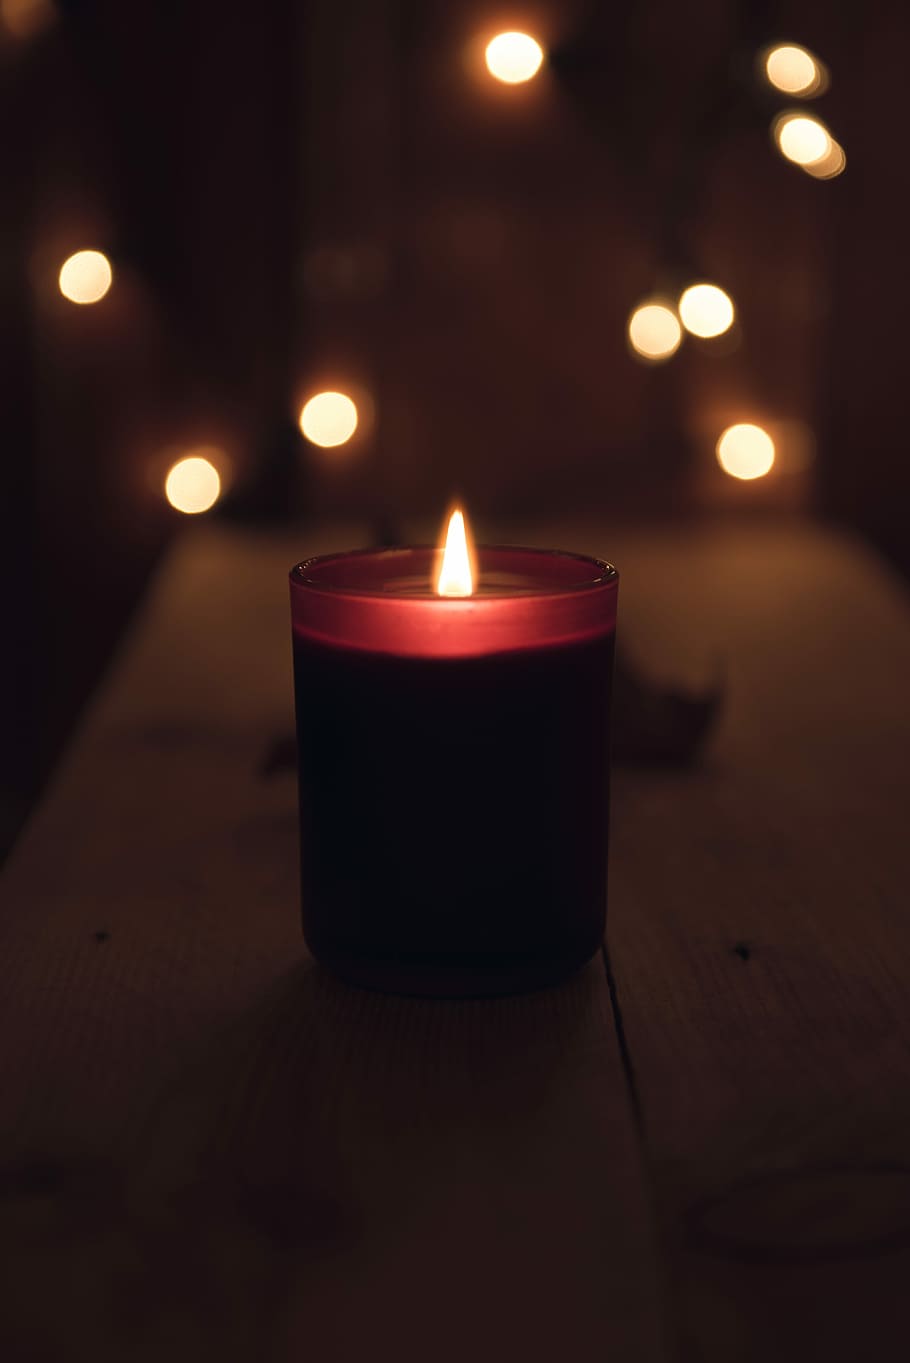 HD wallpaper: tealight candle, shallow focus photography of black votive  candle | Wallpaper Flare